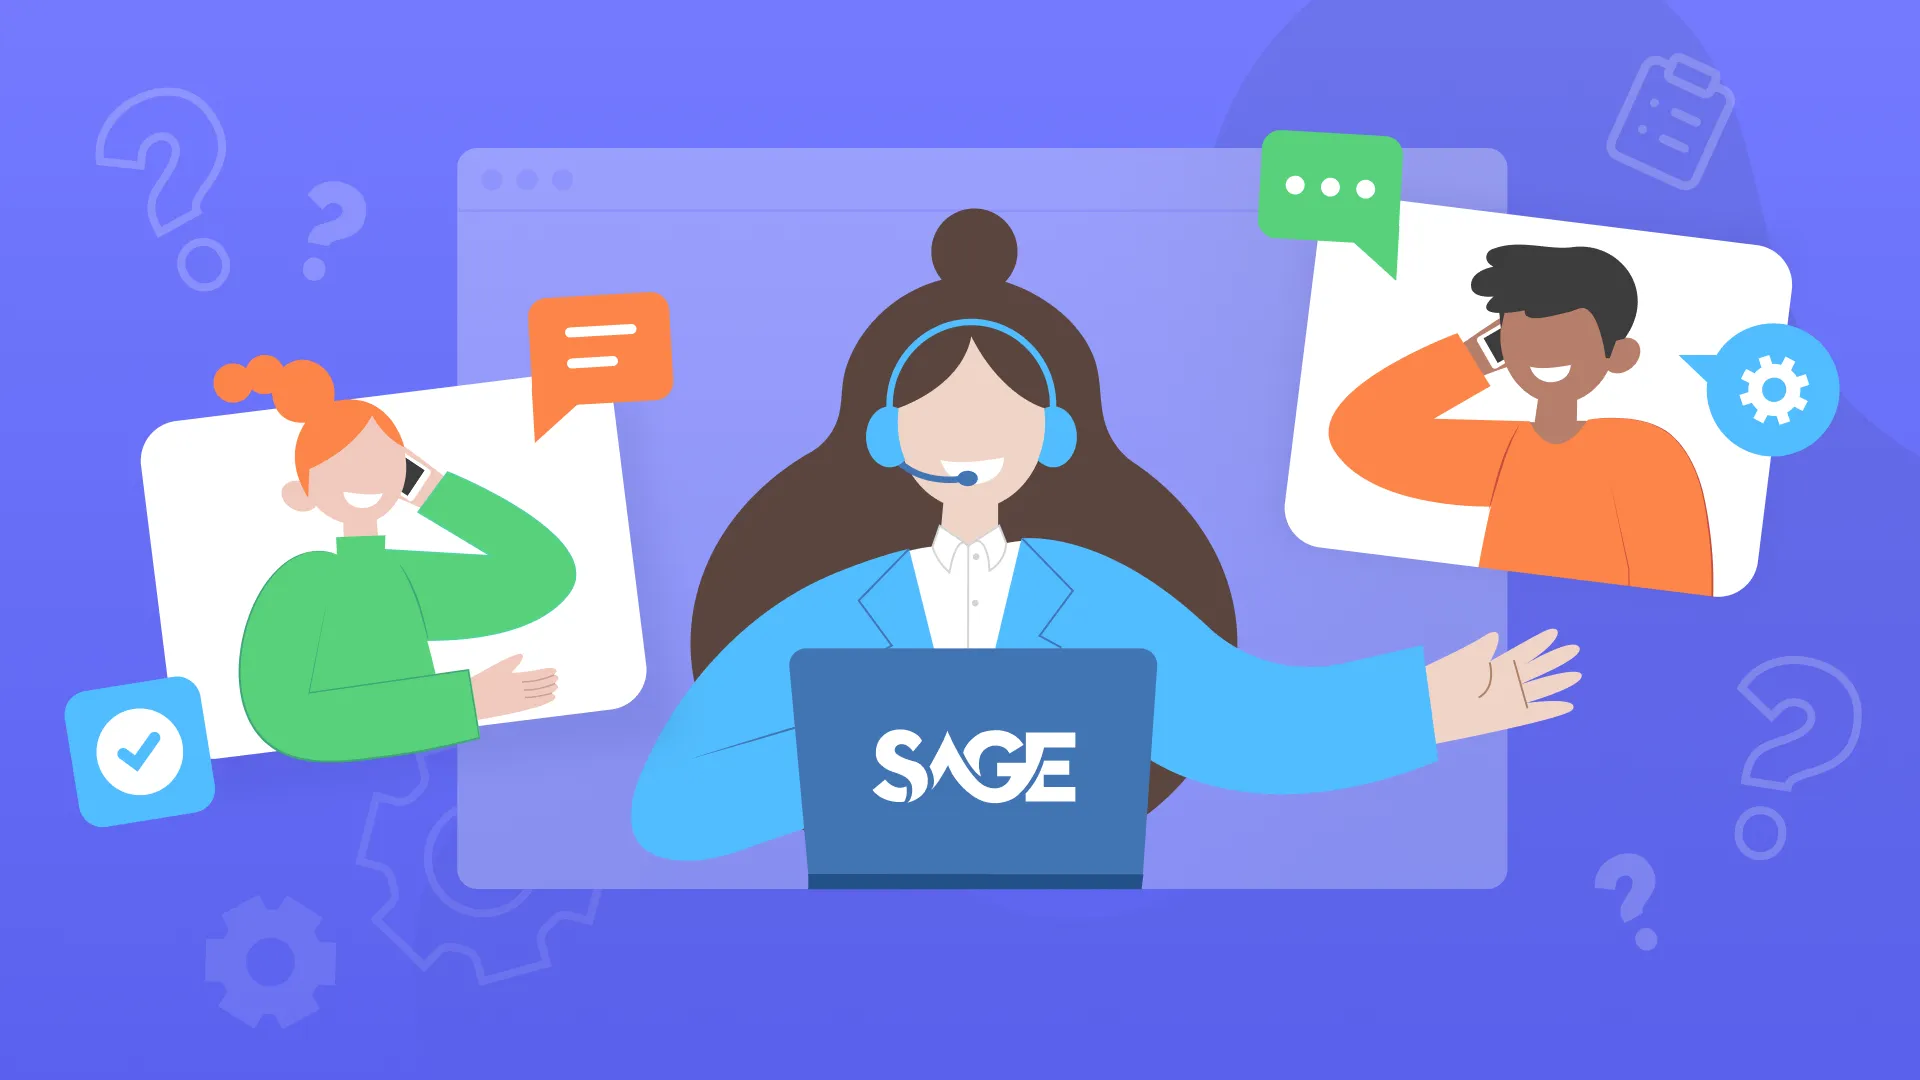 Writing An Excellent Support Ticket to Sage Digital Agency